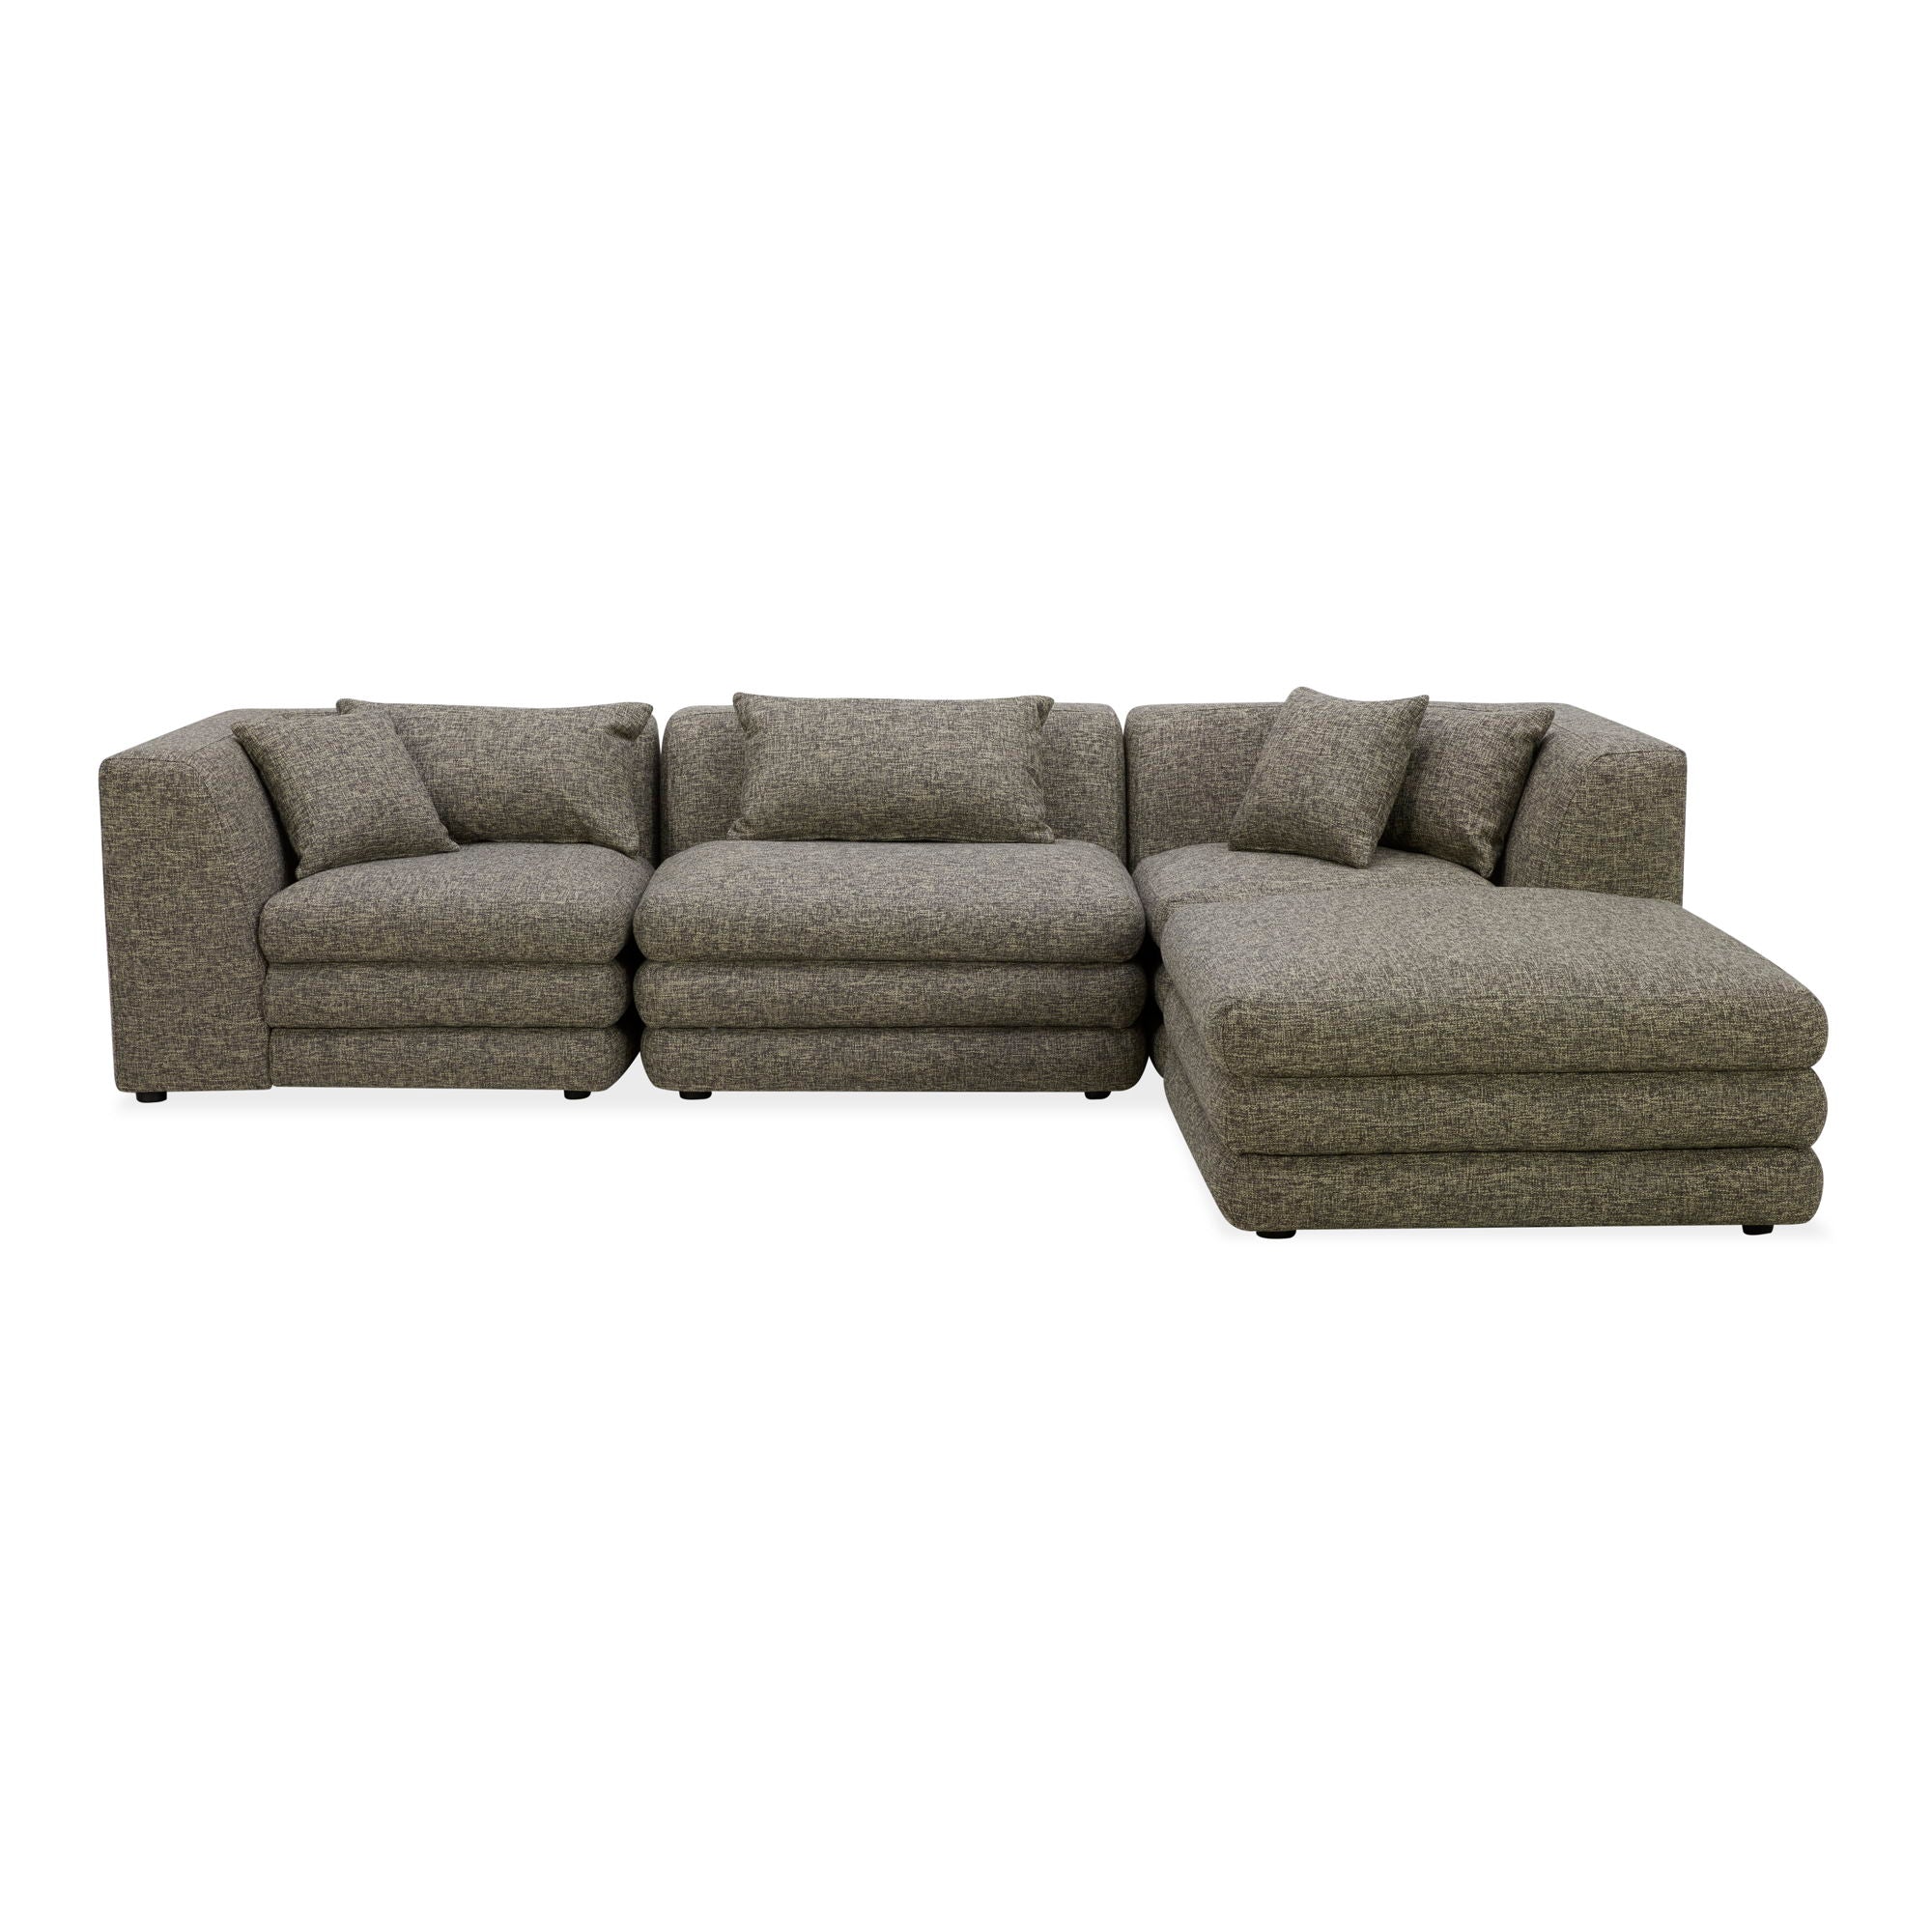 Lowtide - Lounge Modular Sectional - Surie Shadow-Stationary Sectionals-American Furniture Outlet